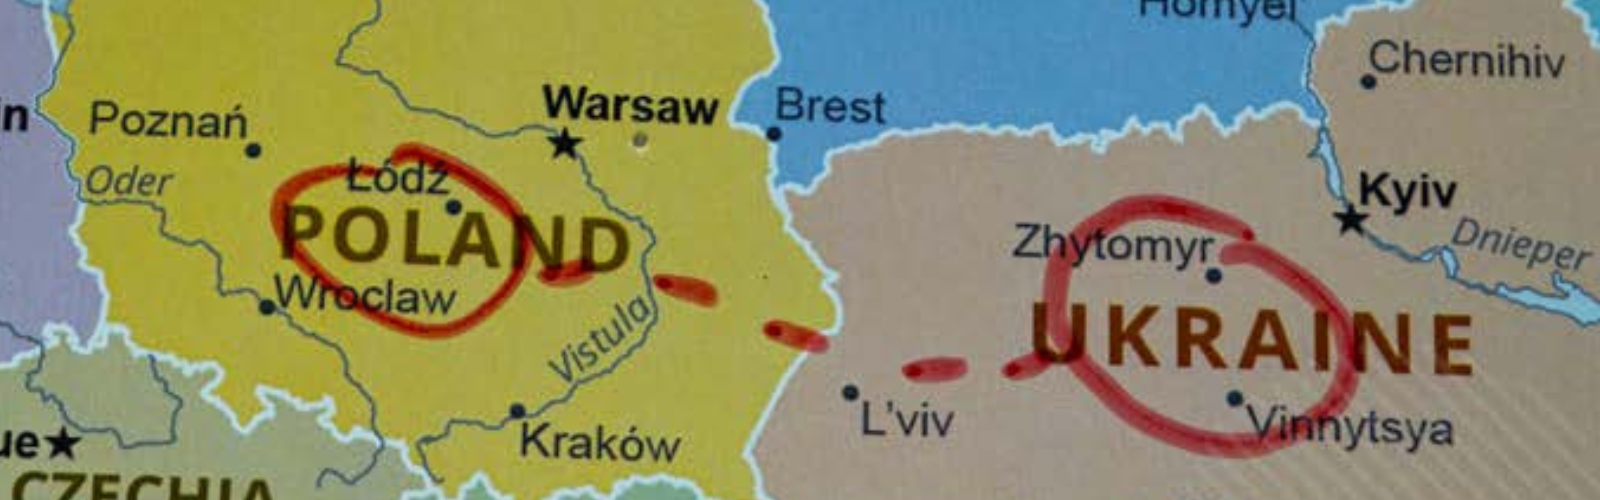 Map of Eastern Europe showing Poland and Ukraine. Poland and Ukraine country names circled in red marker and connected by red dotted line.